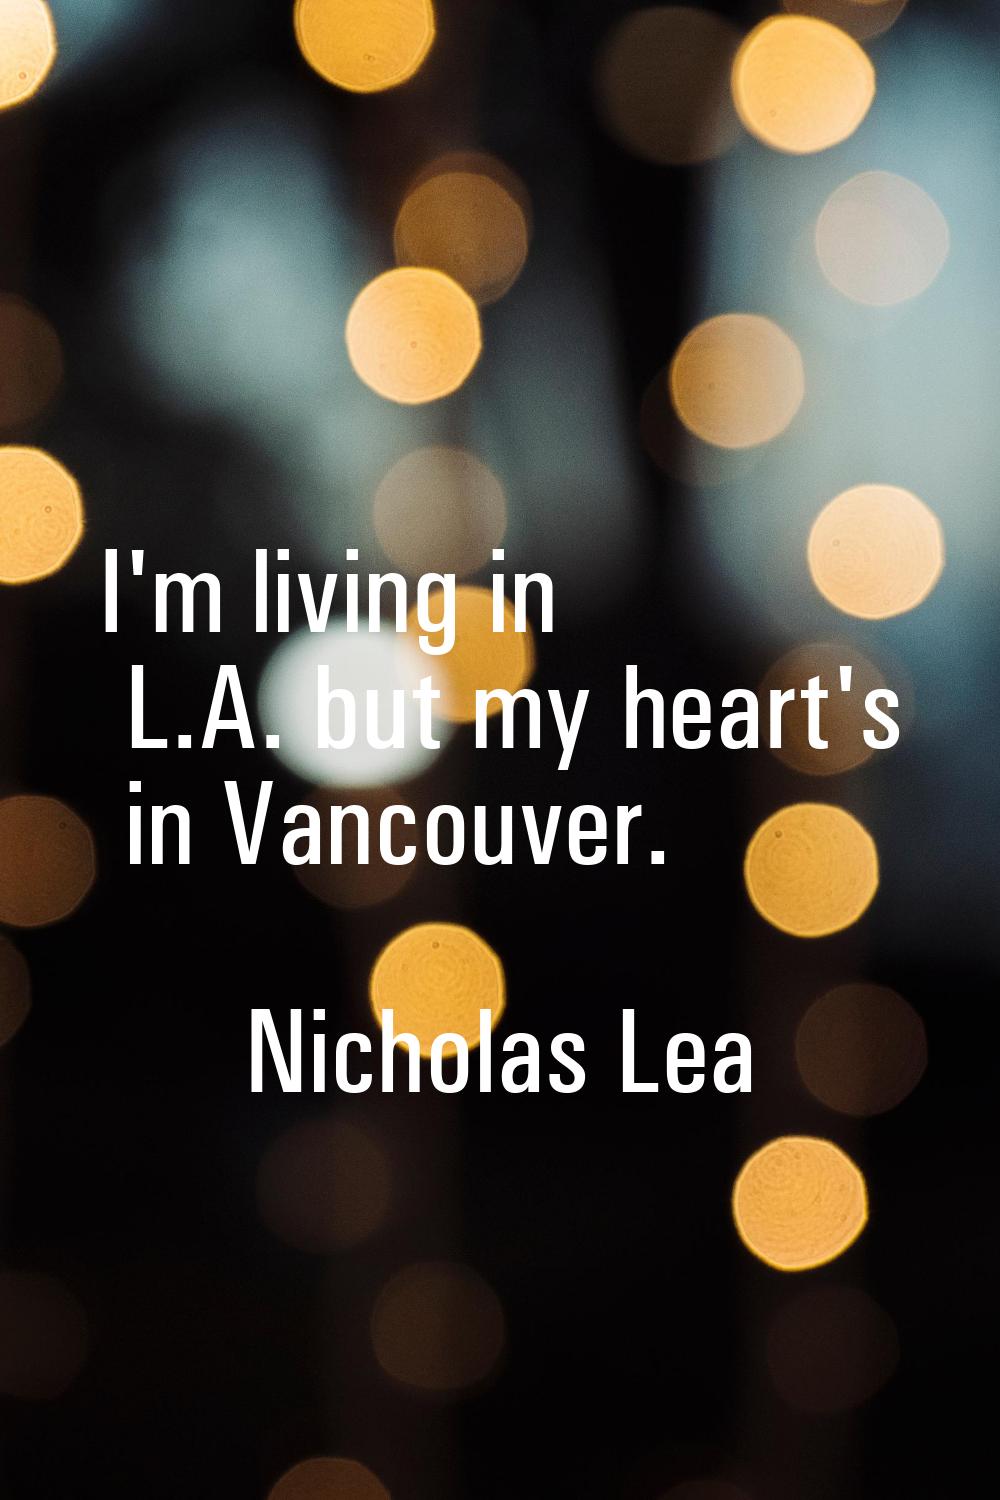 I'm living in L.A. but my heart's in Vancouver.